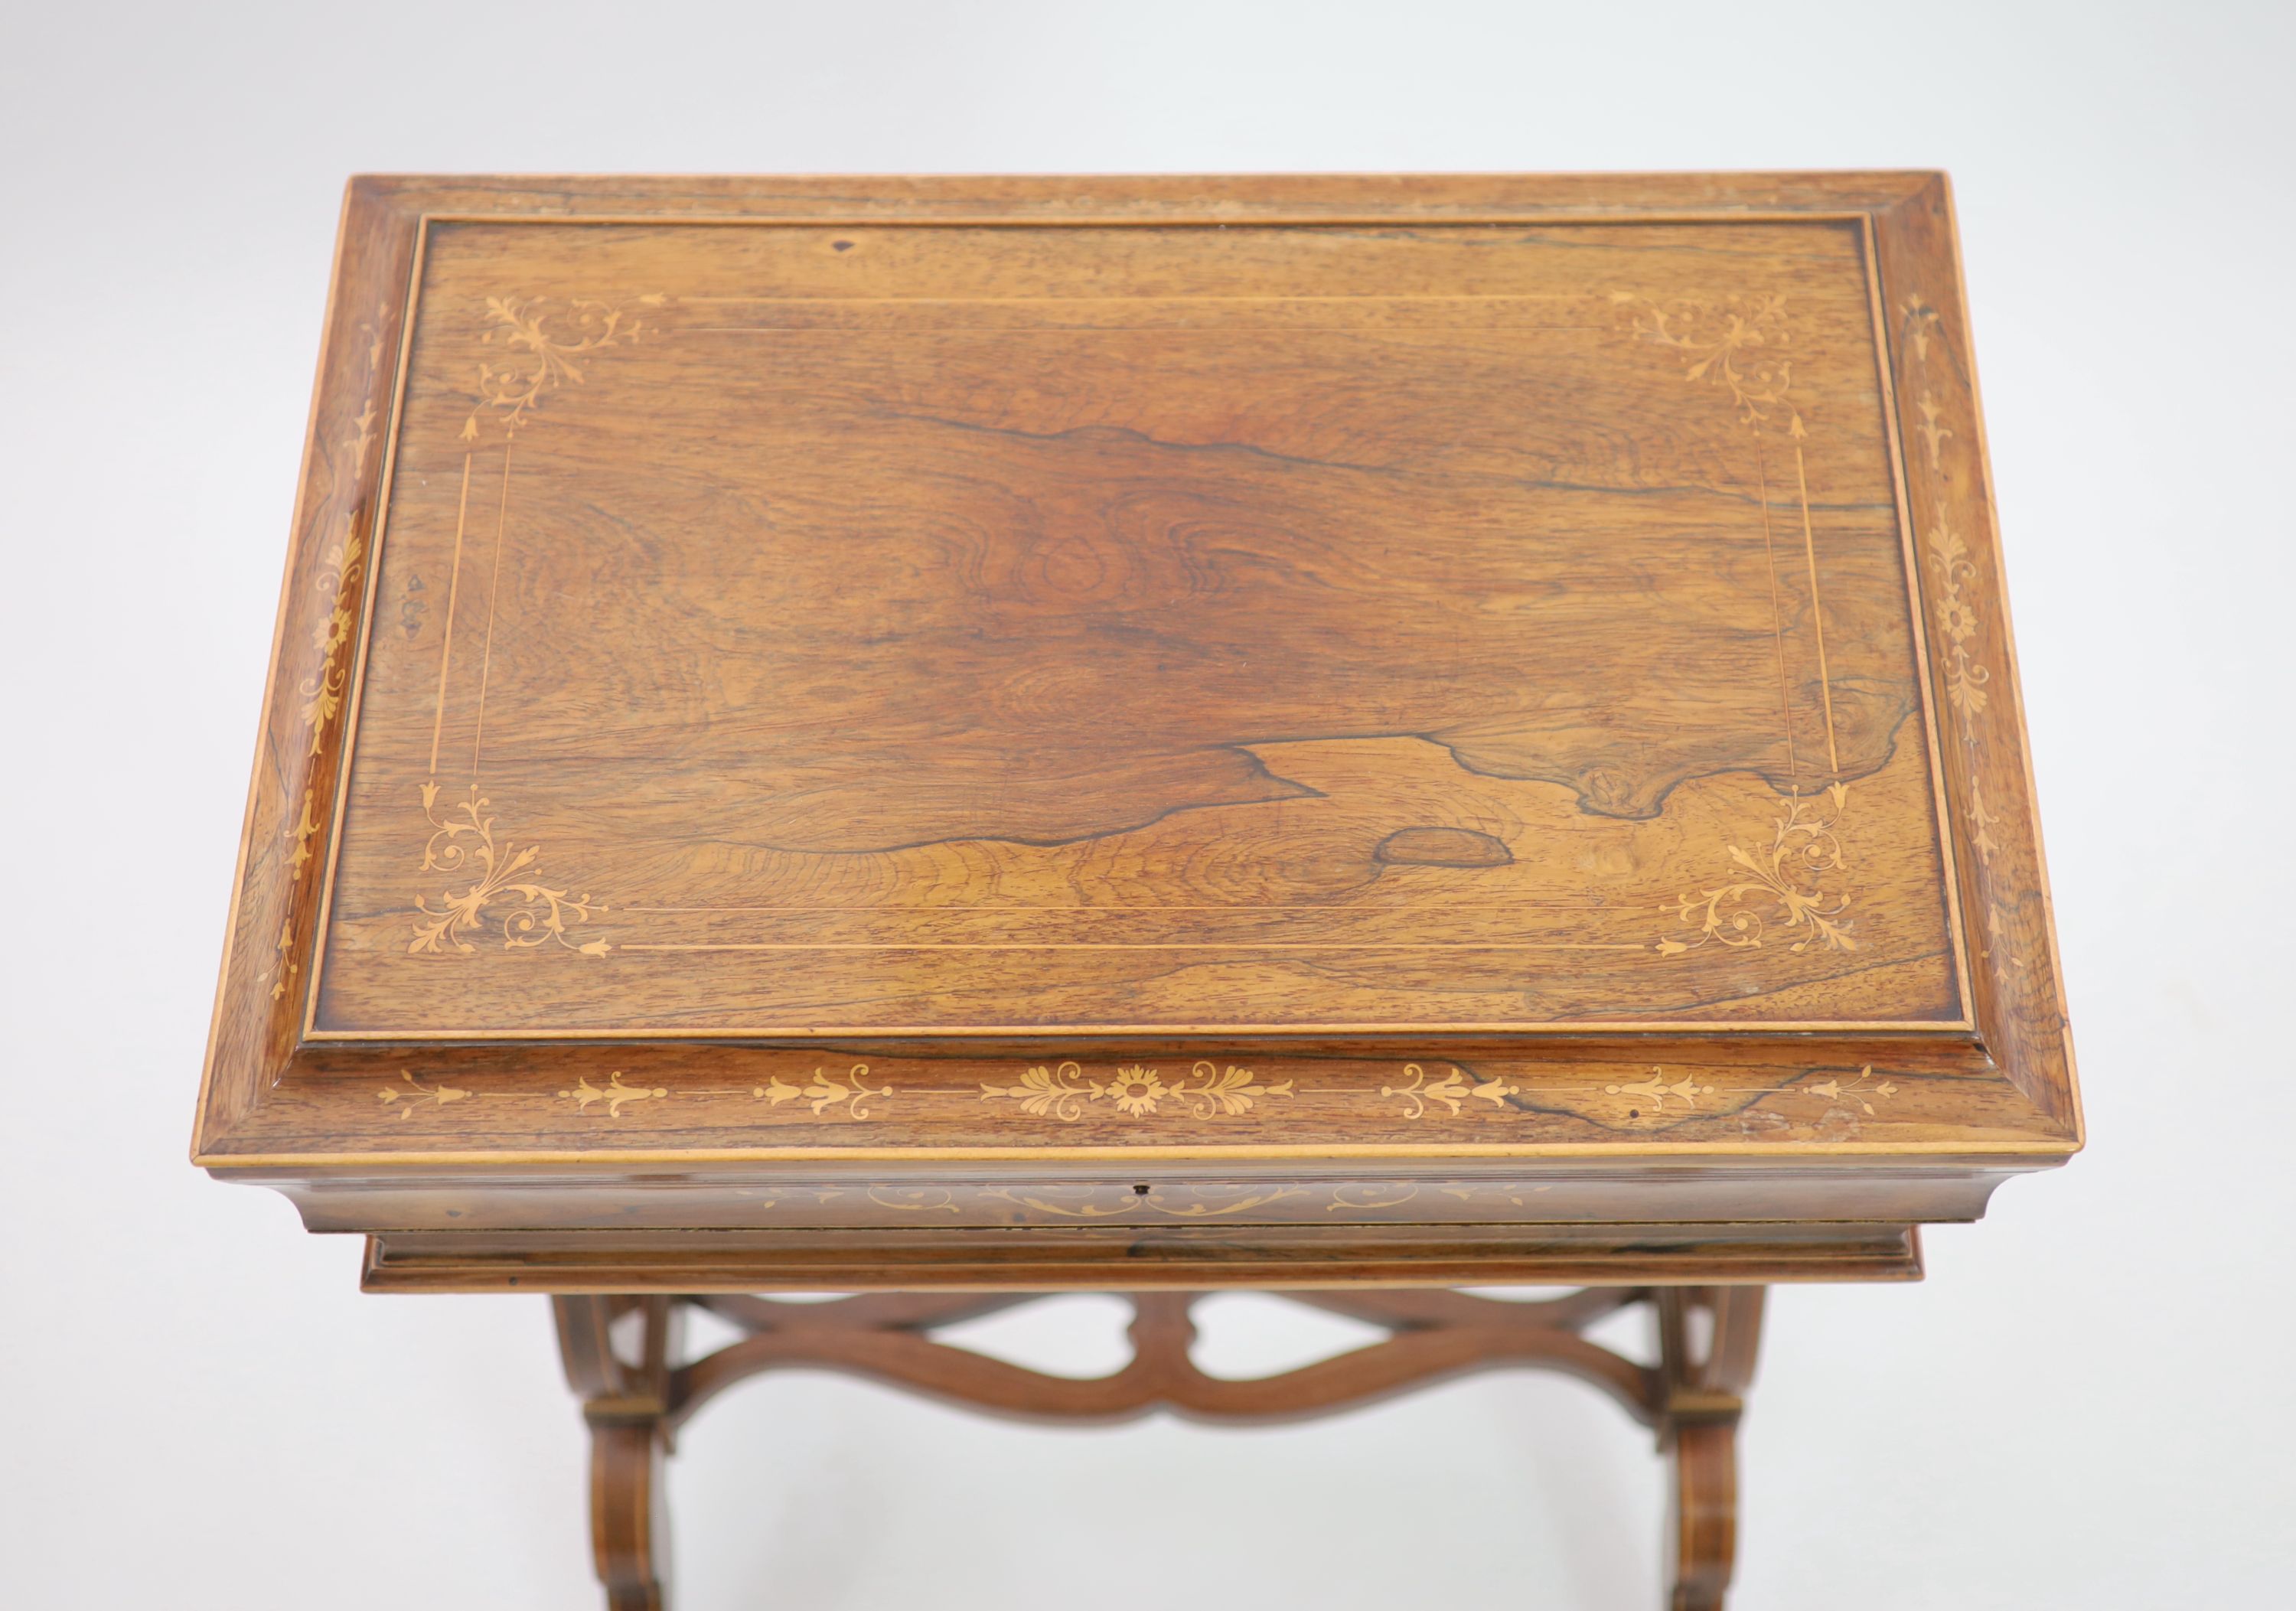 A 19th century French rosewood and sycamore lined lady's dressing table, c.1830, by Alphonse Giroux, Paris, W.60cm D.40cm H.80cm